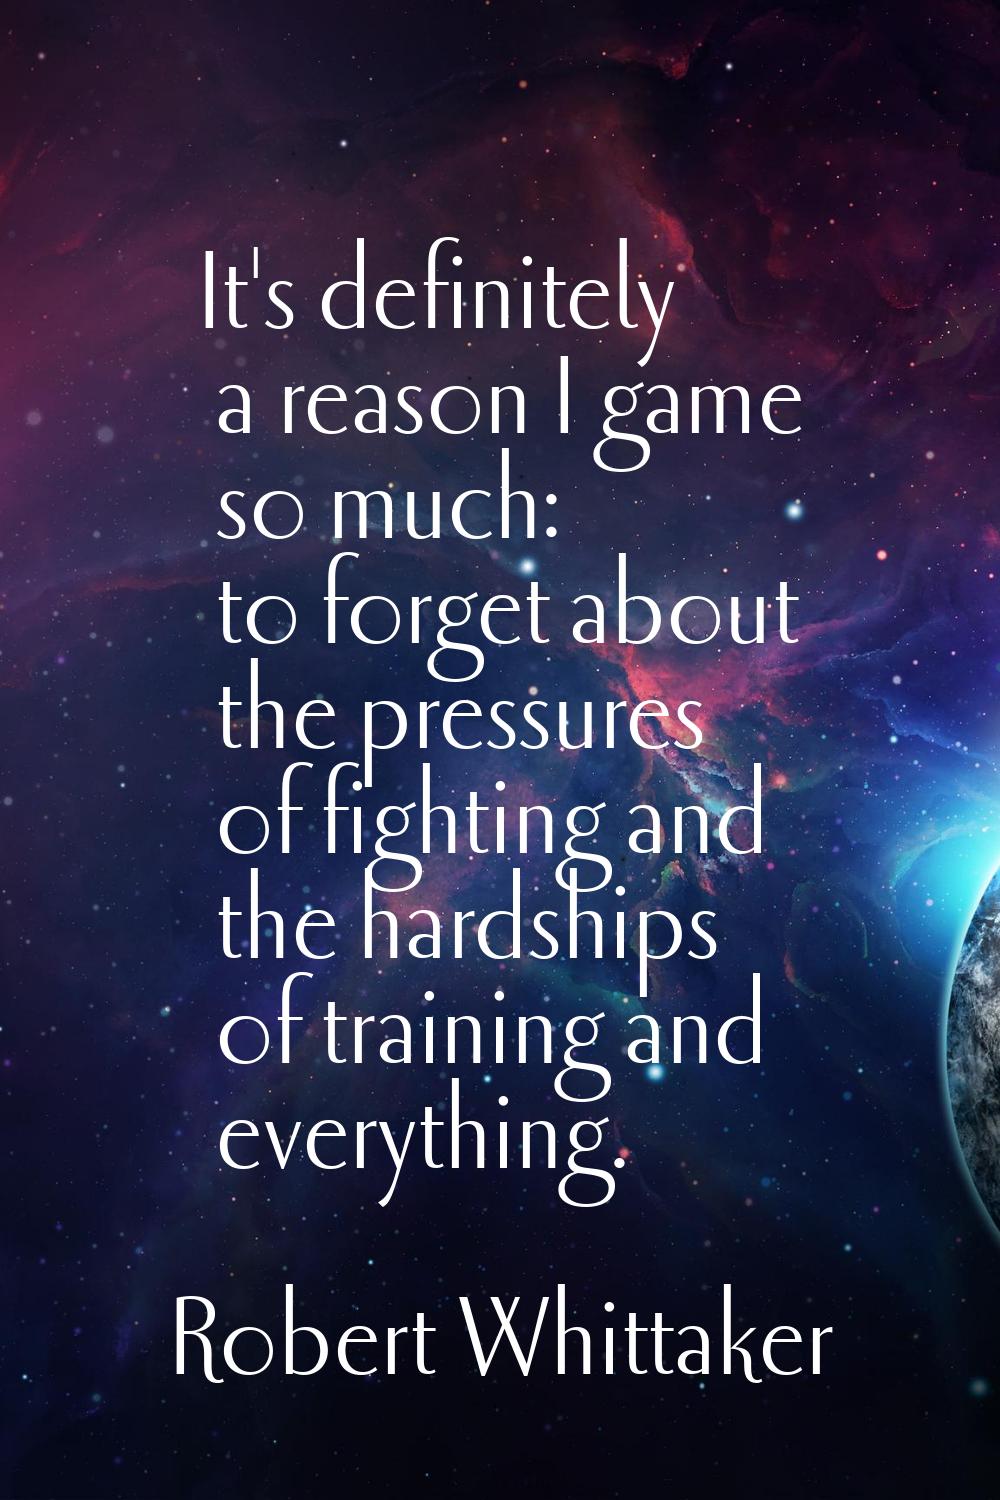 It's definitely a reason I game so much: to forget about the pressures of fighting and the hardship